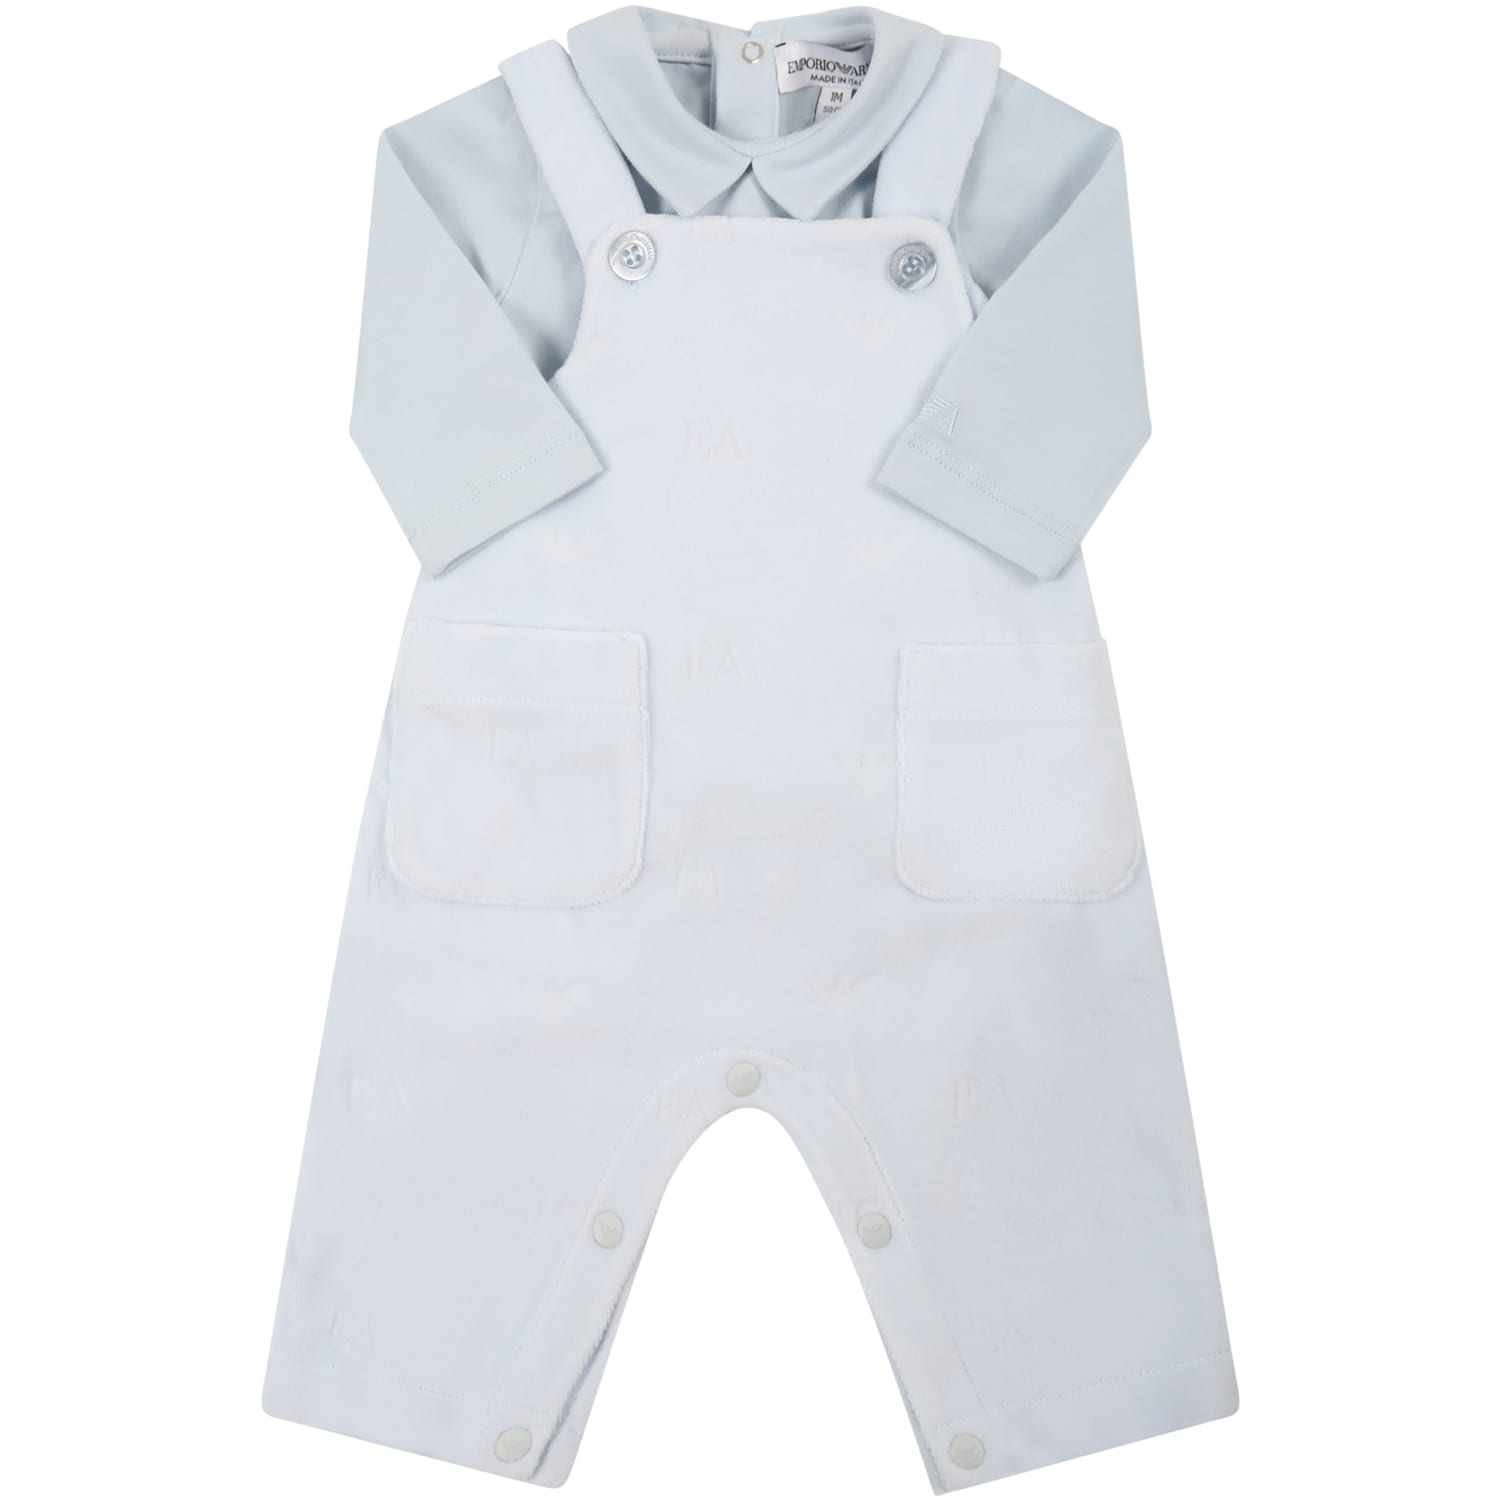 Armani Collezioni Light Blue Set For Baby Boy With Eagles